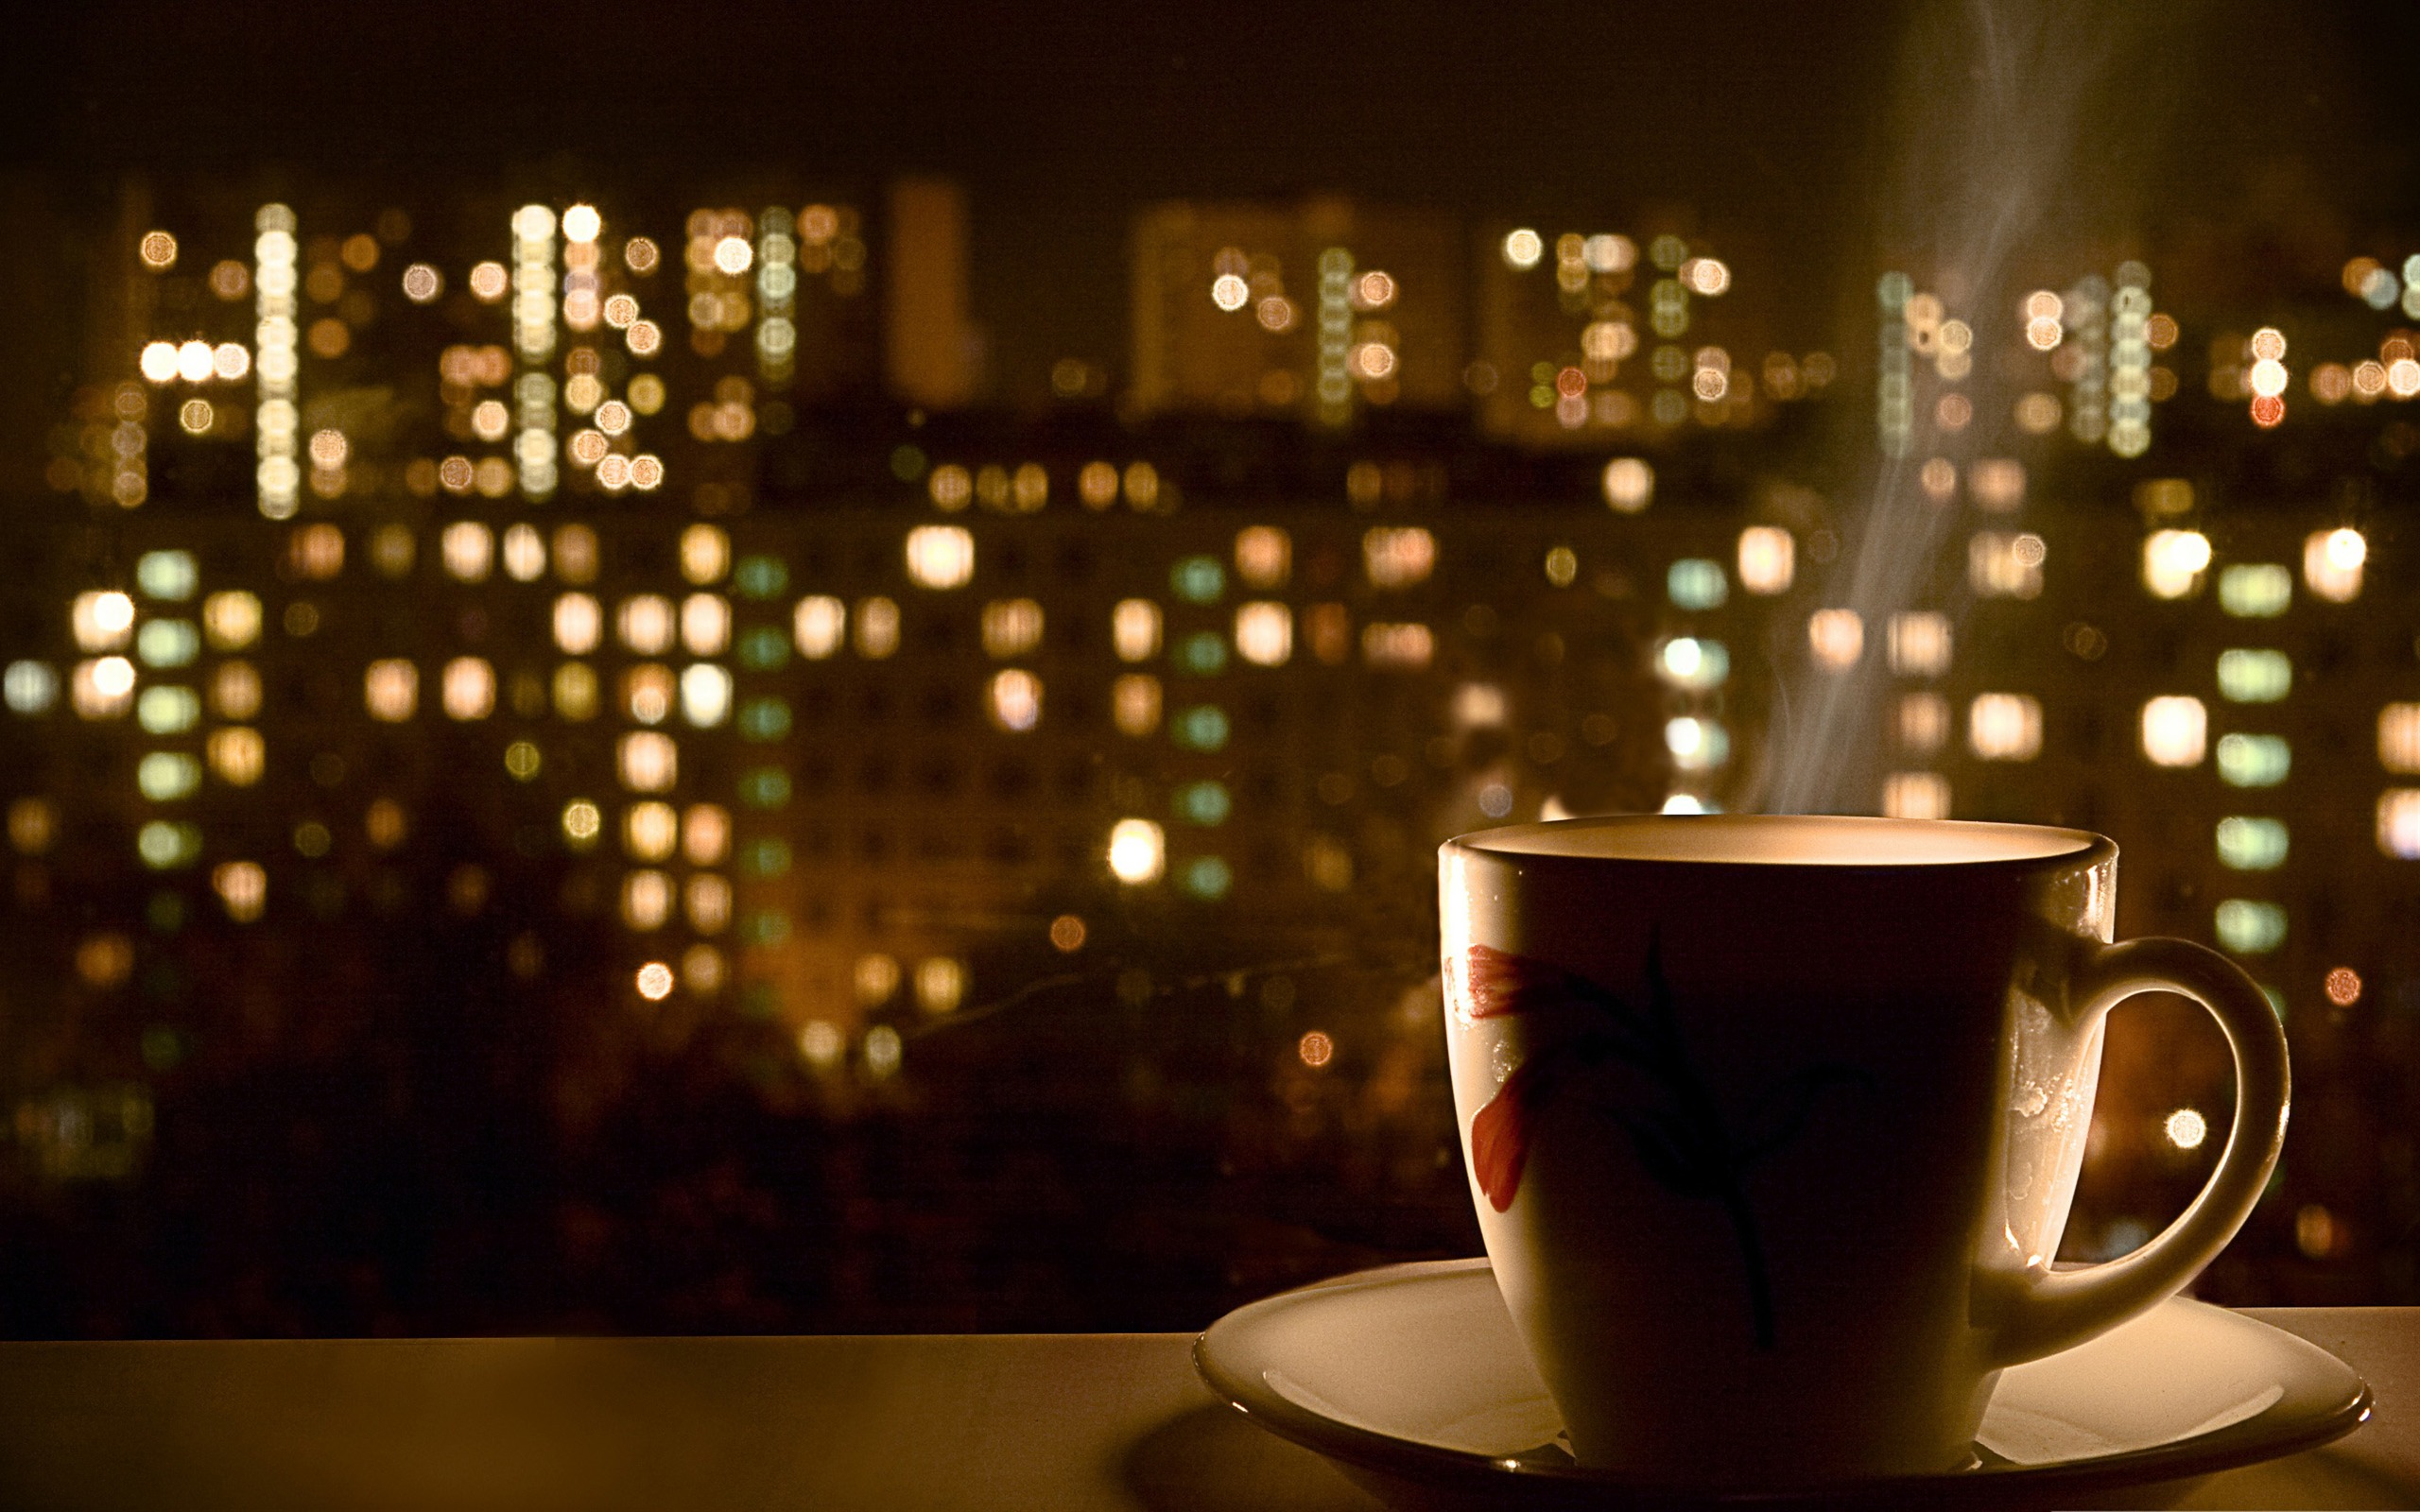 Cup Of Coffee The Urban Landscape Photography Desktop Wallpaper